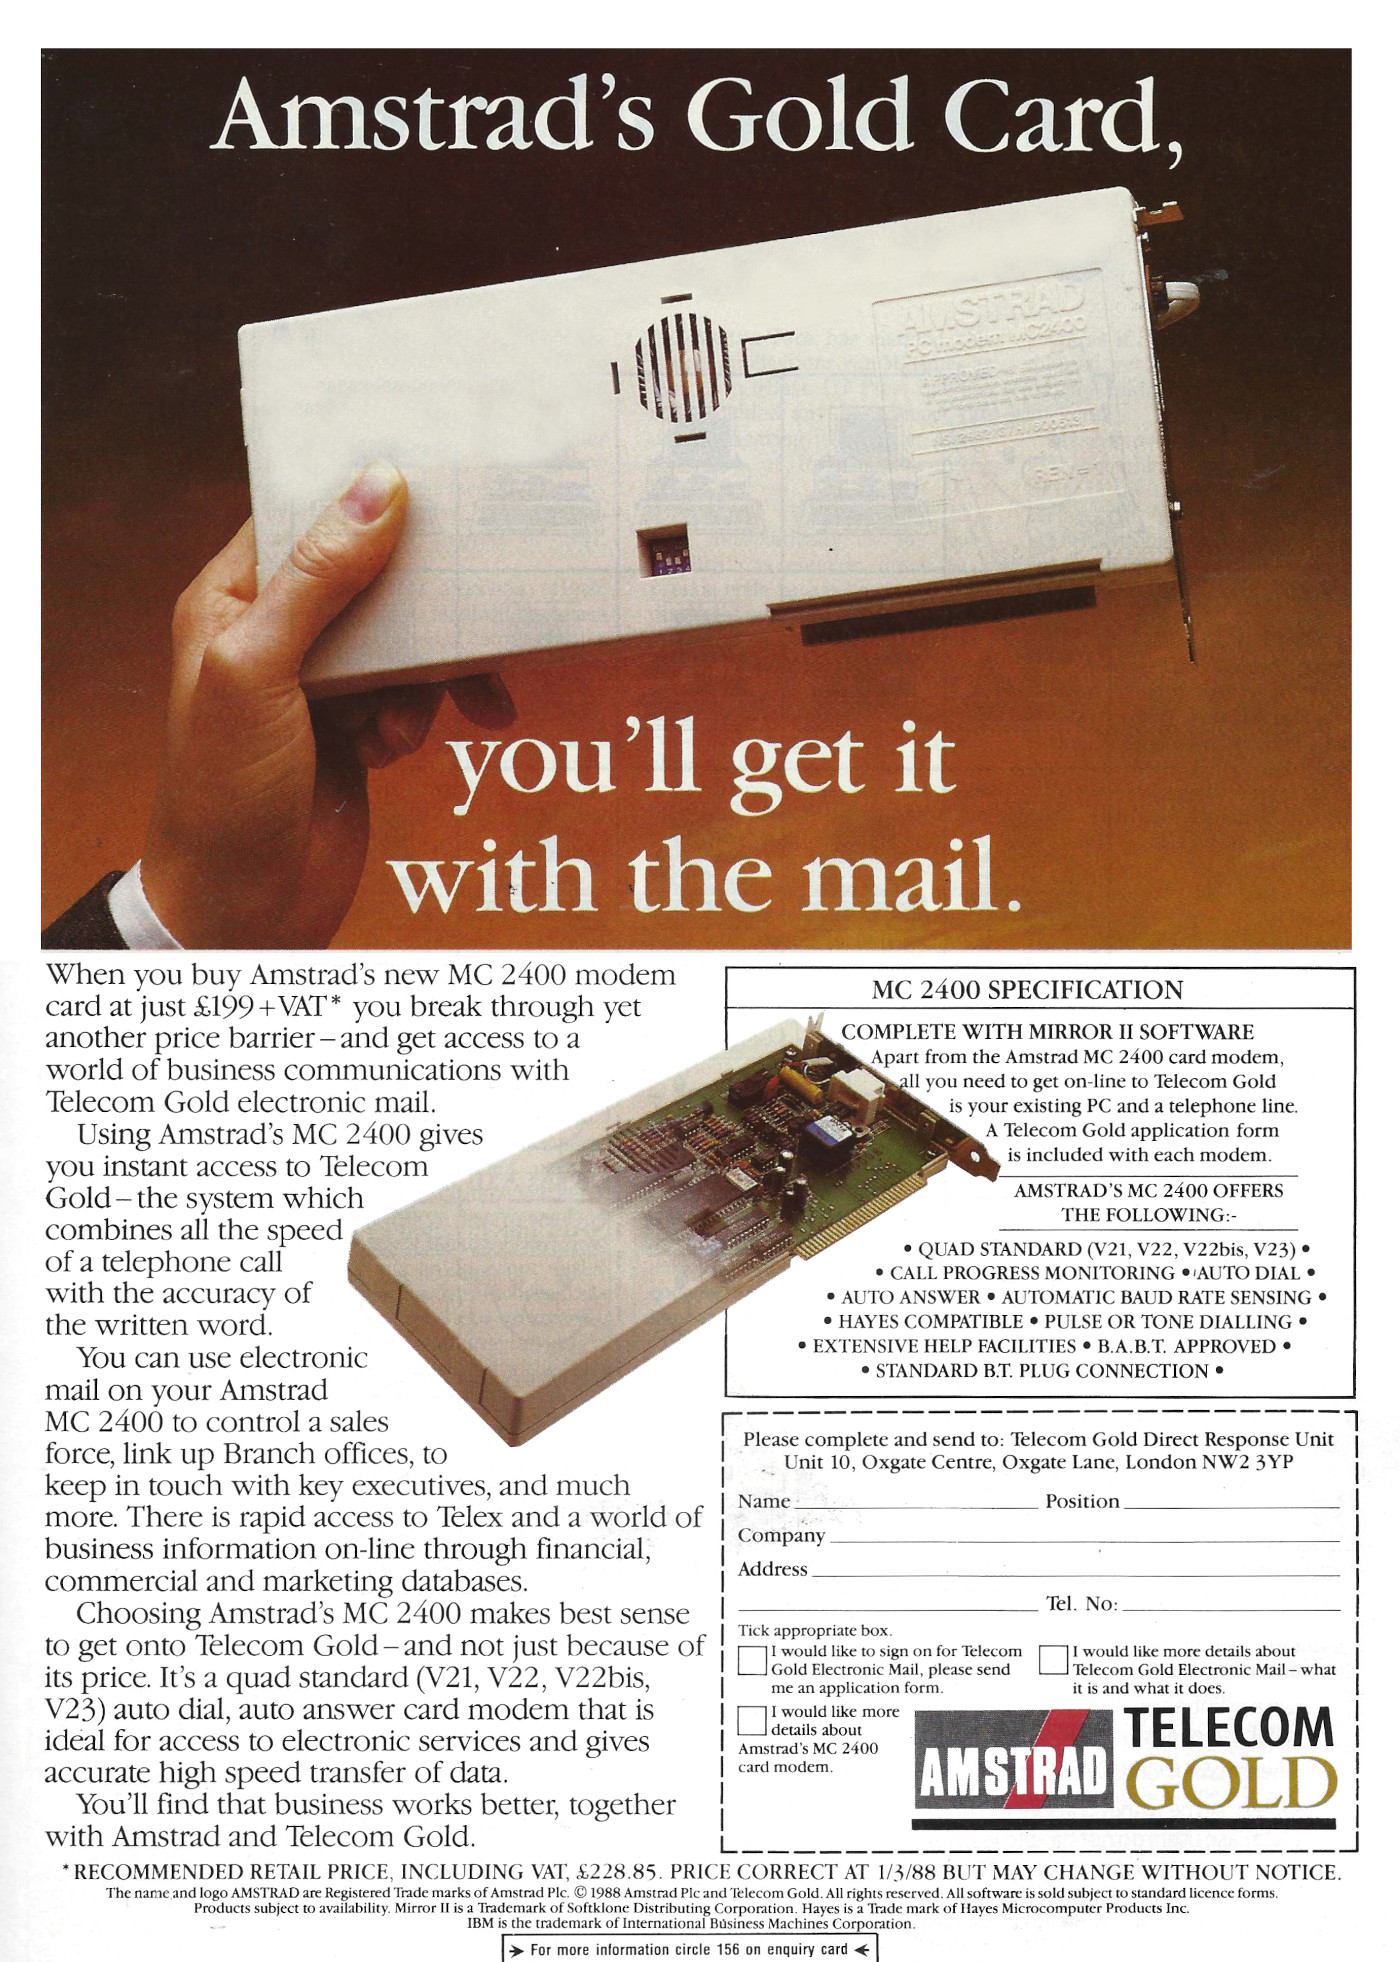 Amstrad's <span class='hilite'><span class='hilite'>MC2400</span></span> modem for £199 + VAT, a groundbreaking price for a modem at the time. From Practical Computing, April 1988